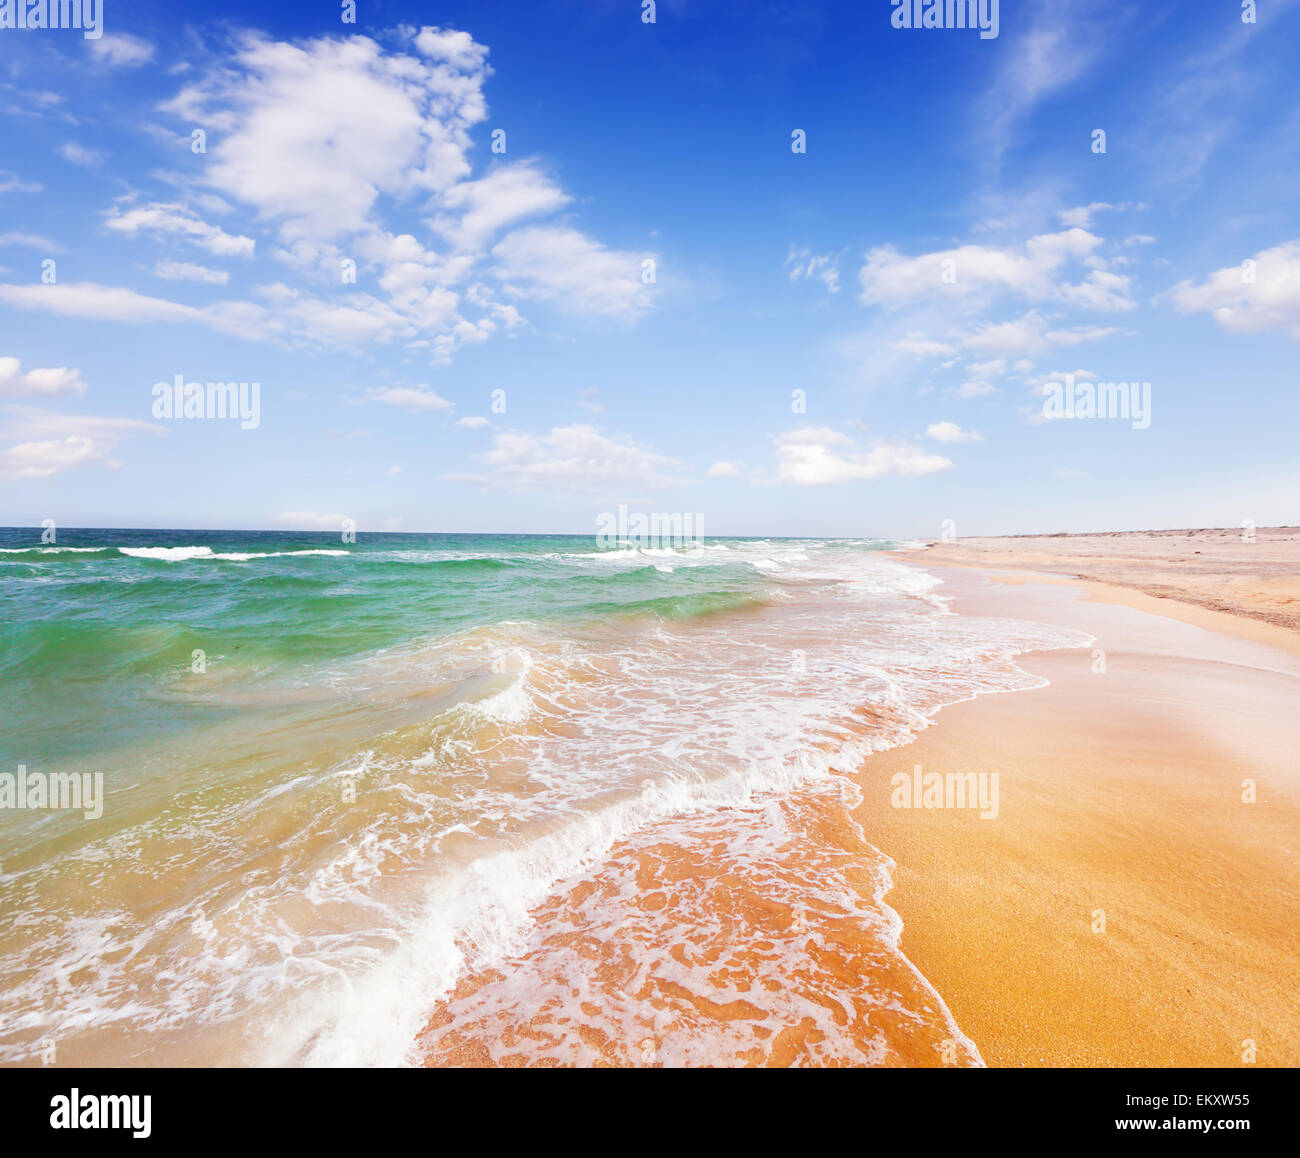 beach and stormy sea Stock Photo